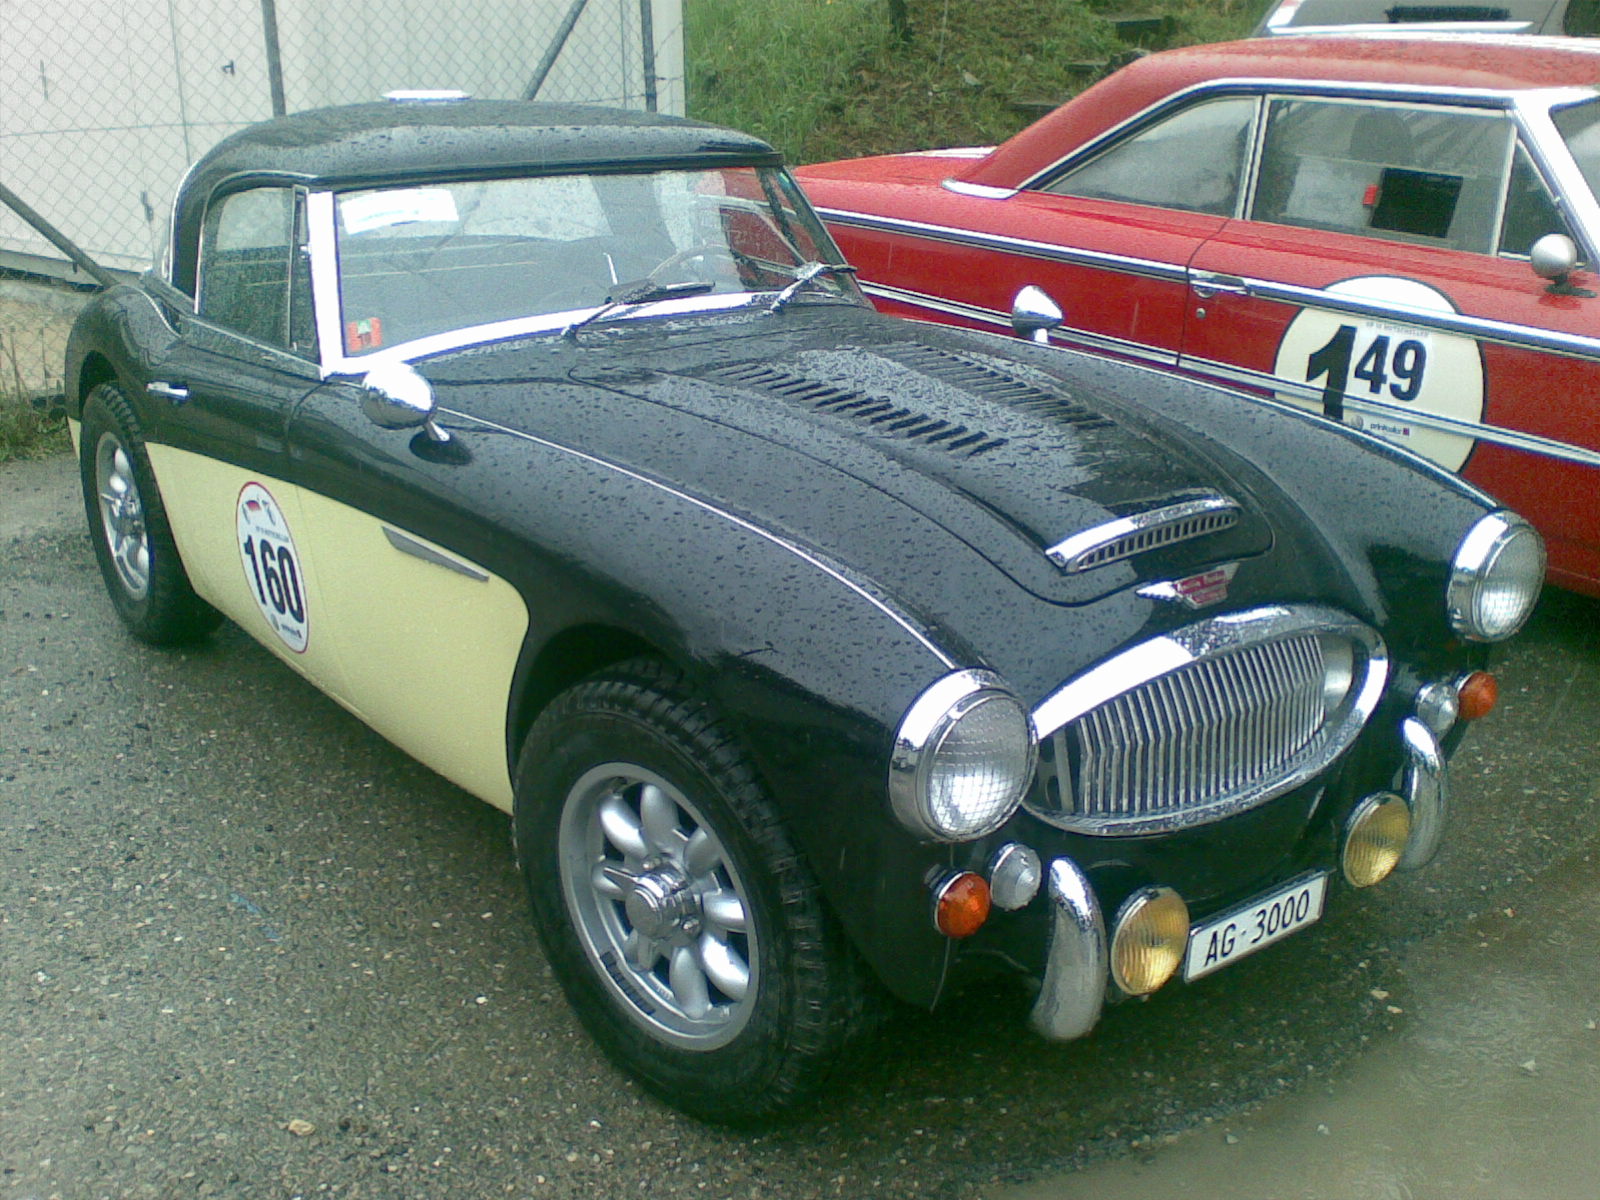 Austin-Healey 3000 Mk III 1964-1967 (1966), right front view